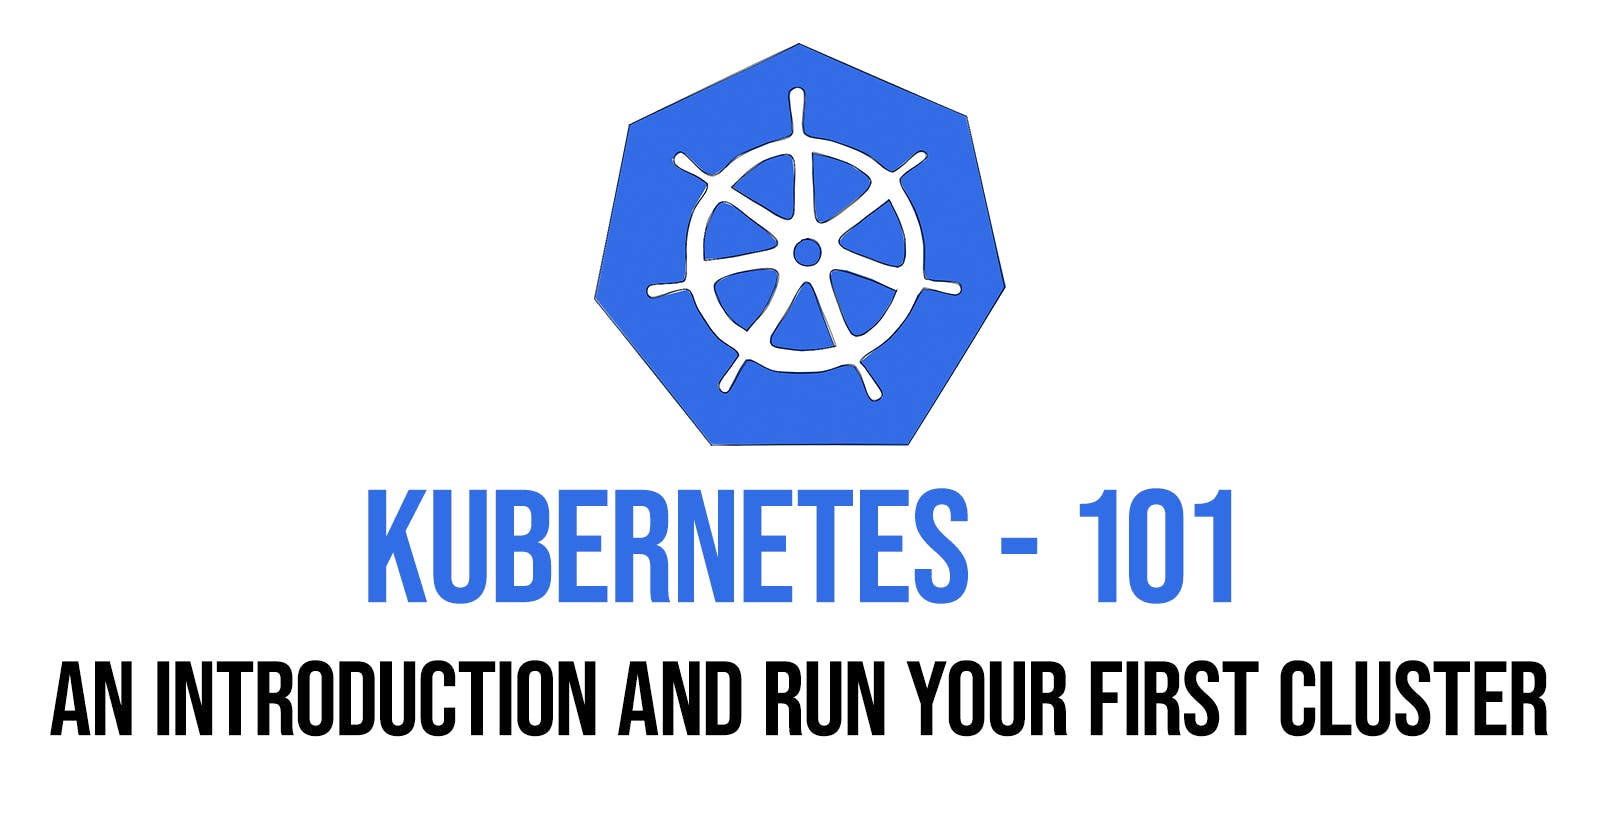 K8s-101: An Introduction to Kubernetes and run your first cluster